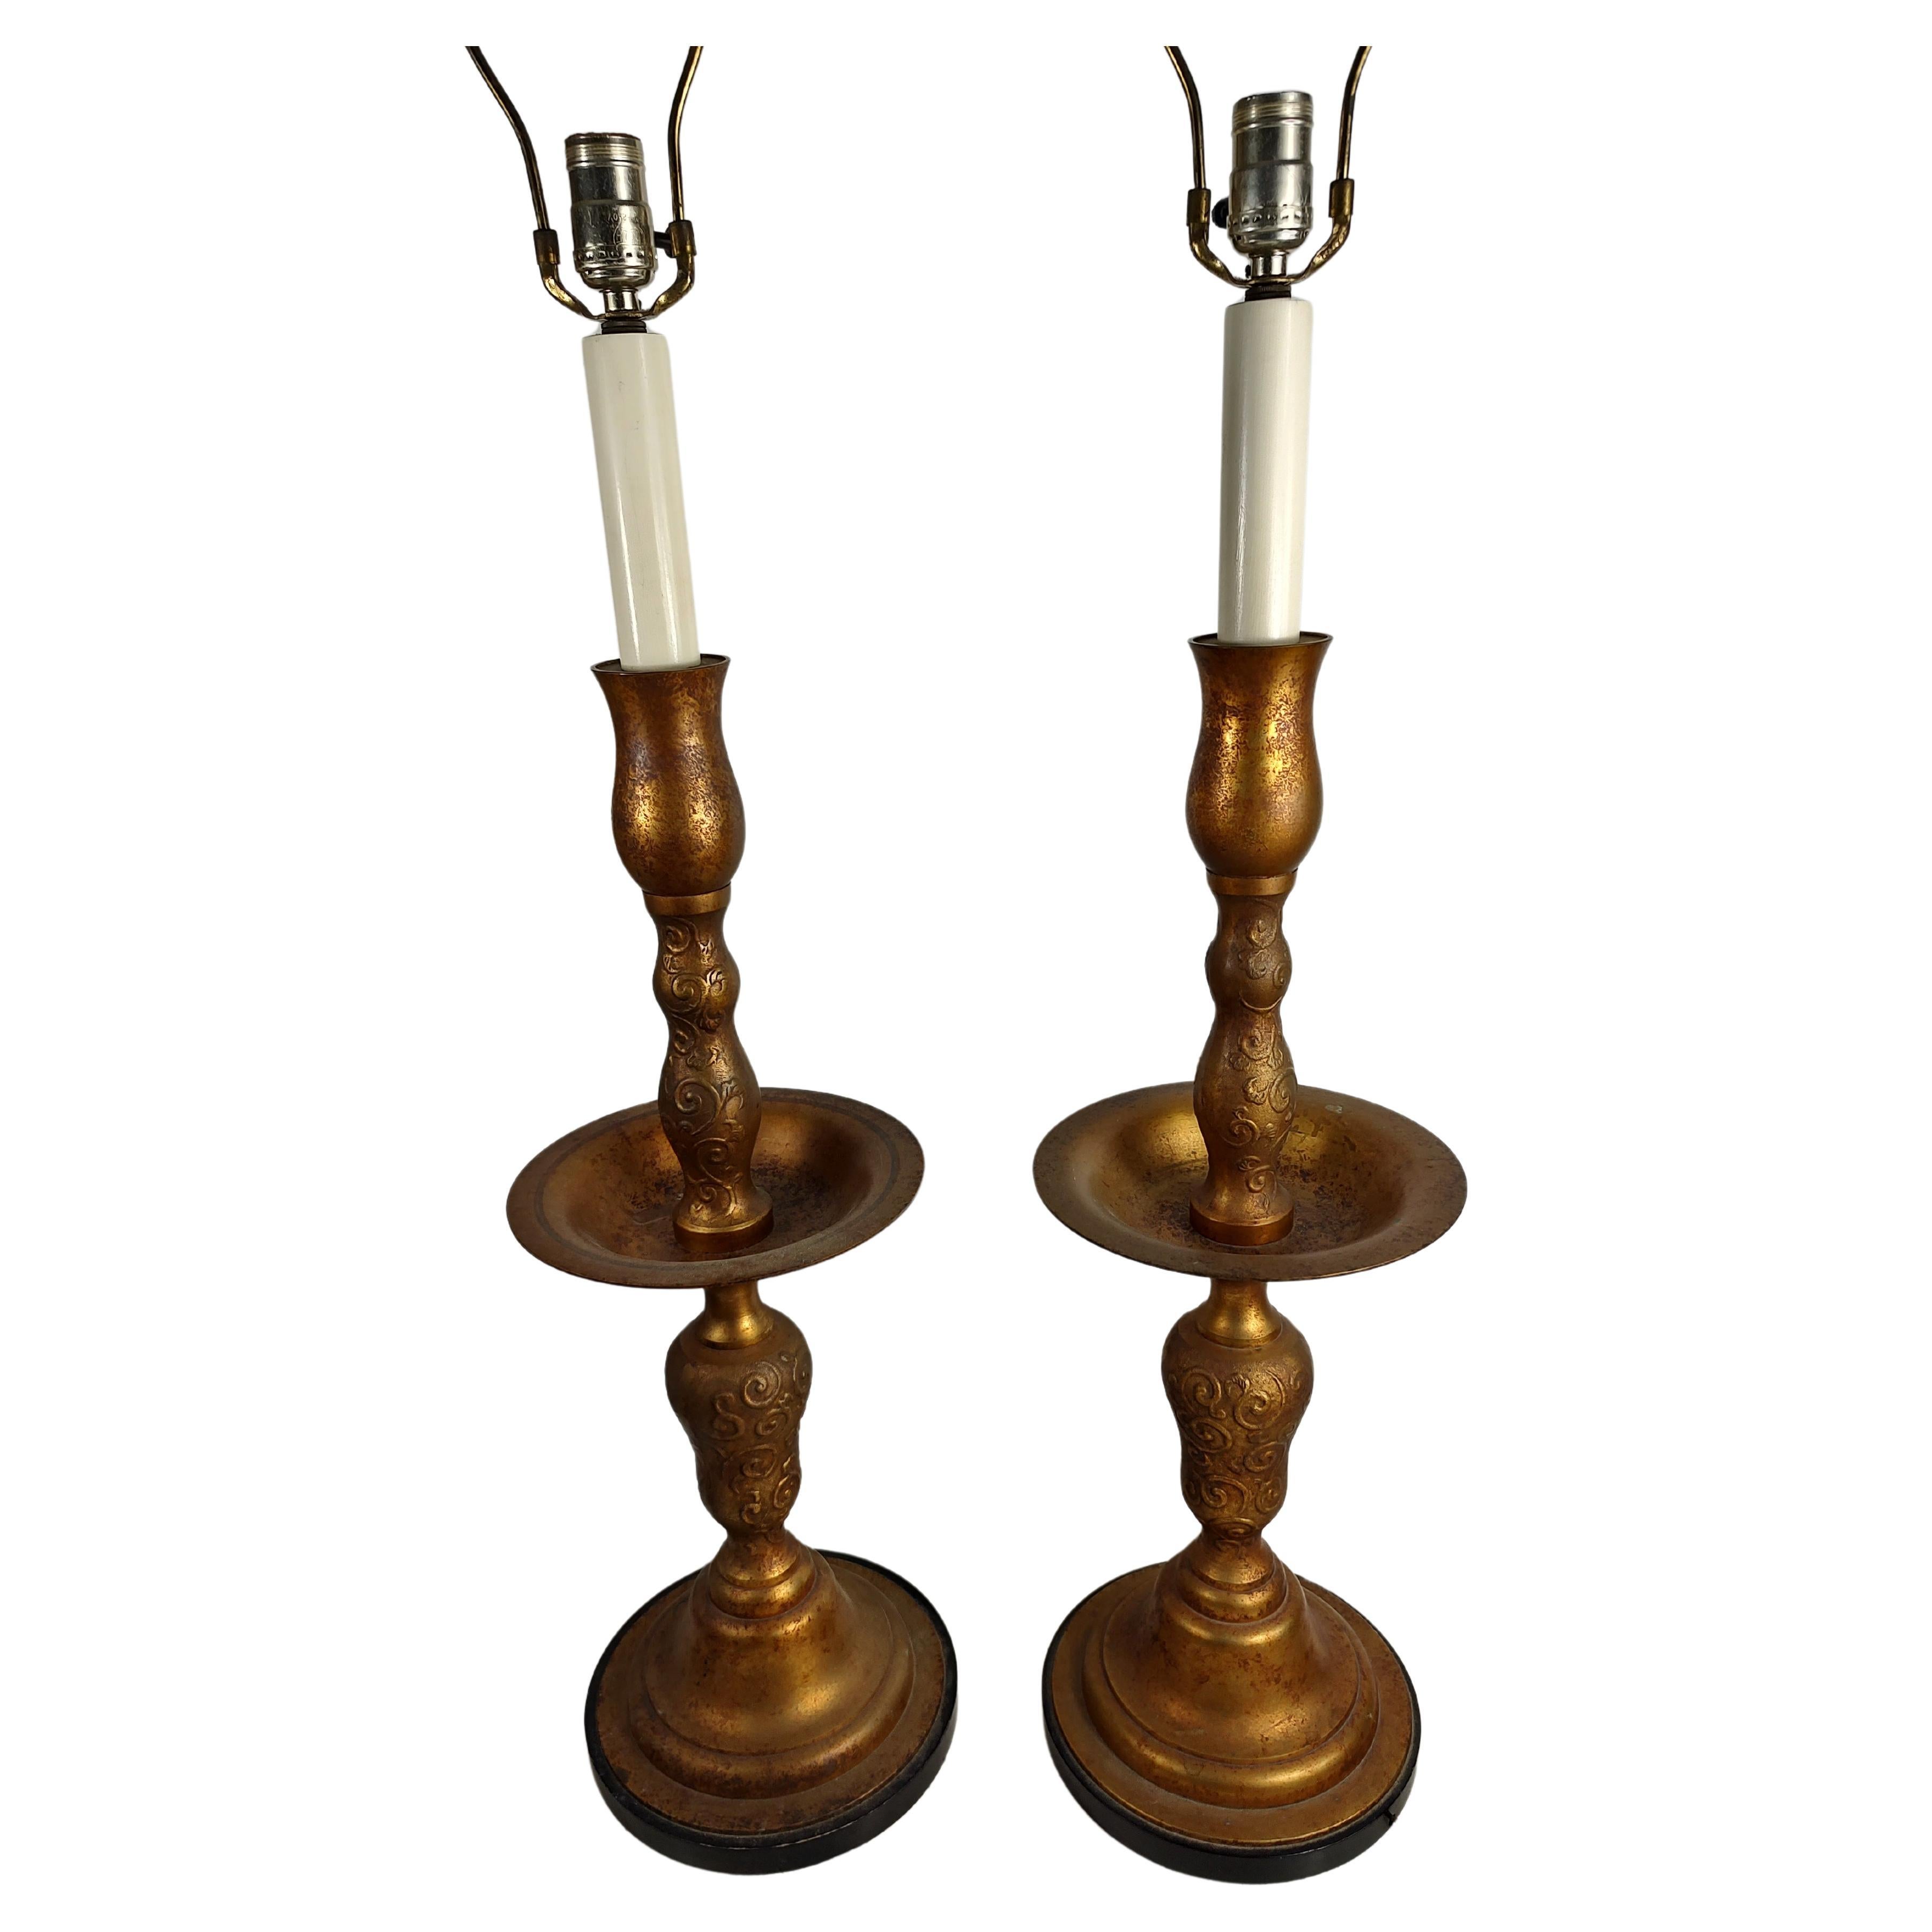 Fabulous pair of tall (34.5 to the top of the socket) gilt metal candlelabra style, pricket style table lamps. Beautiful matched pair in excellent vintage condition with minimal wear. Wiring is sound with inline switches. 